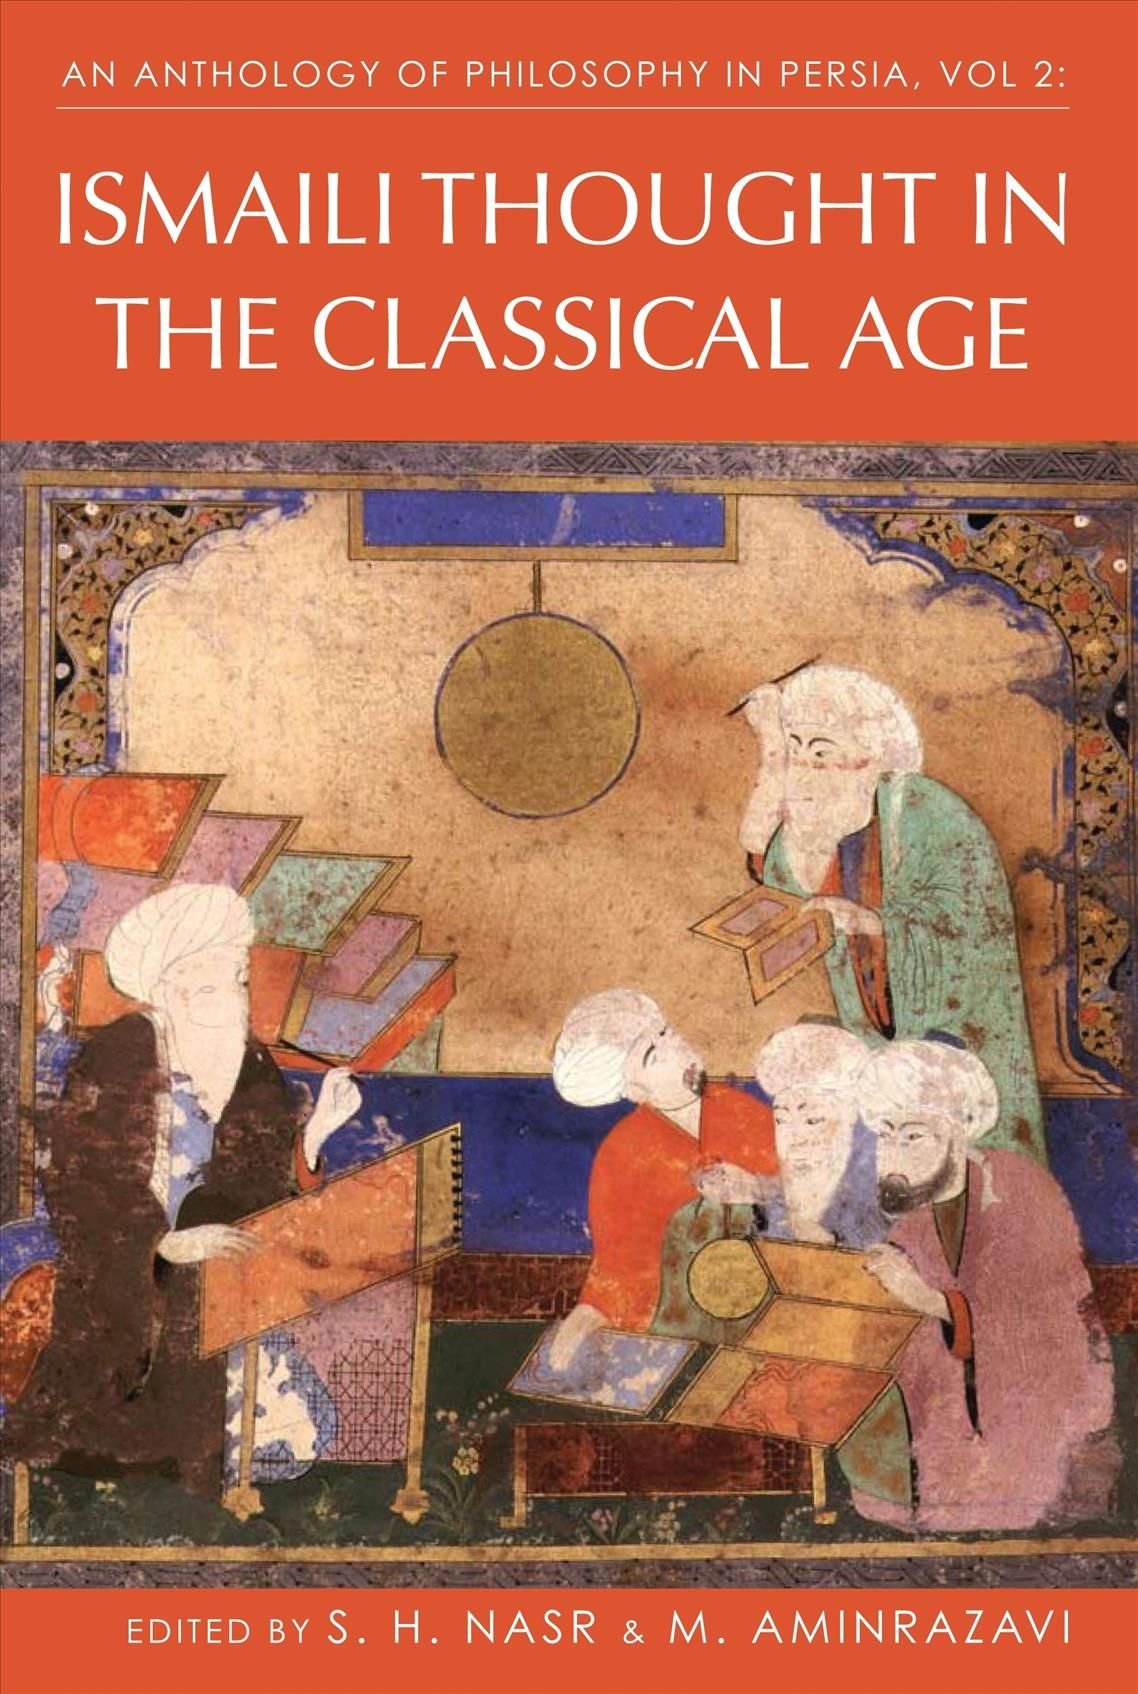 An Anthology of Philosophy in Persia: Ismaili Thought in the Classical Age v. 2